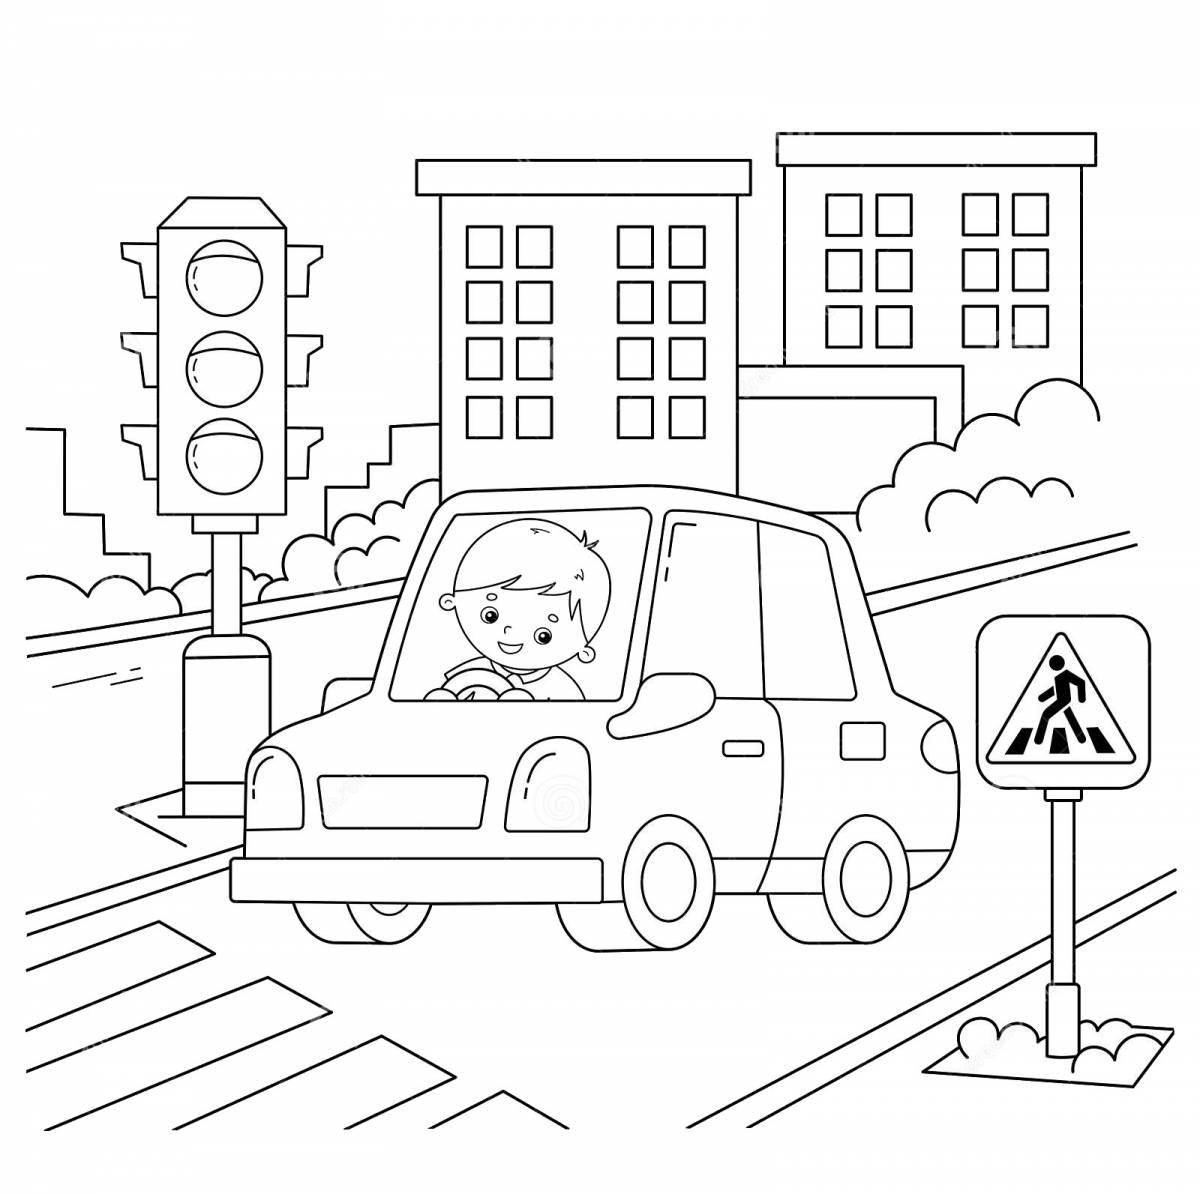 Wonderful road coloring pages for kids